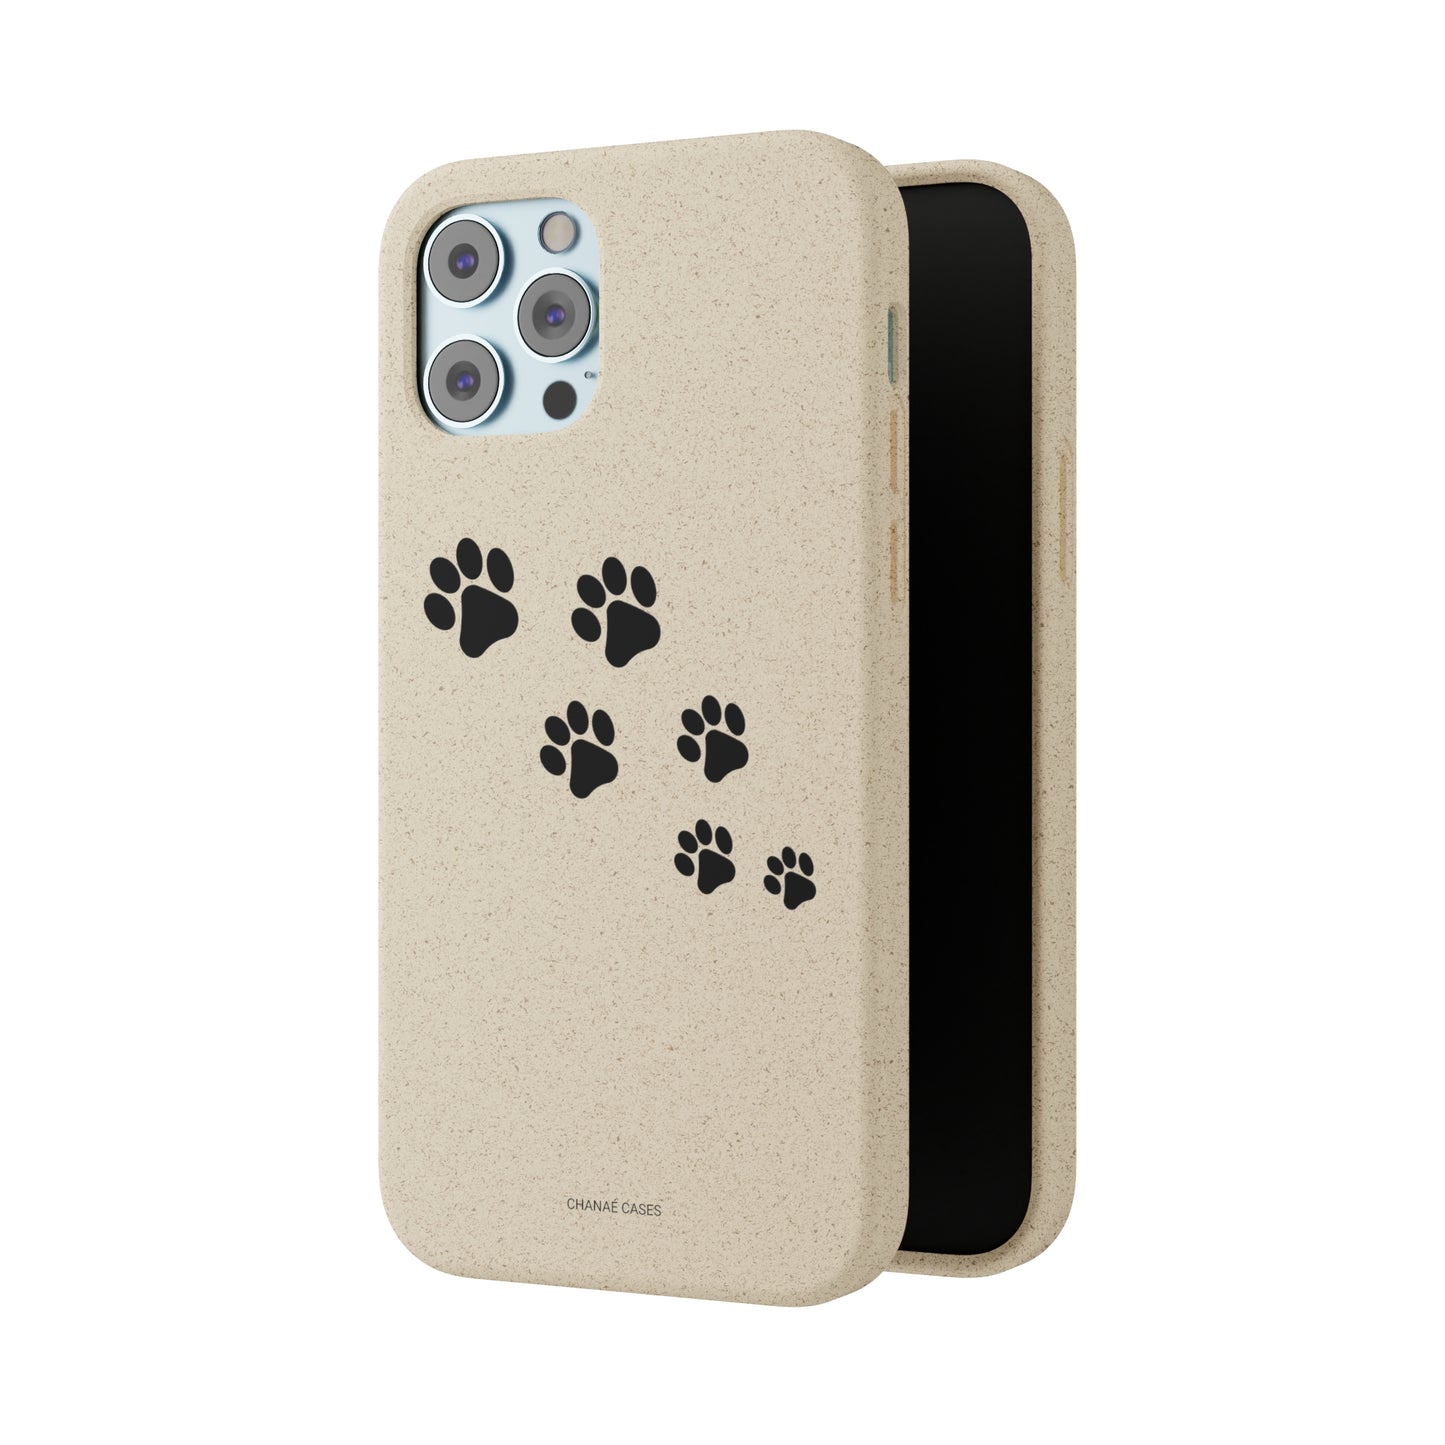 Paws Biodegradable iPhone Case ♻️